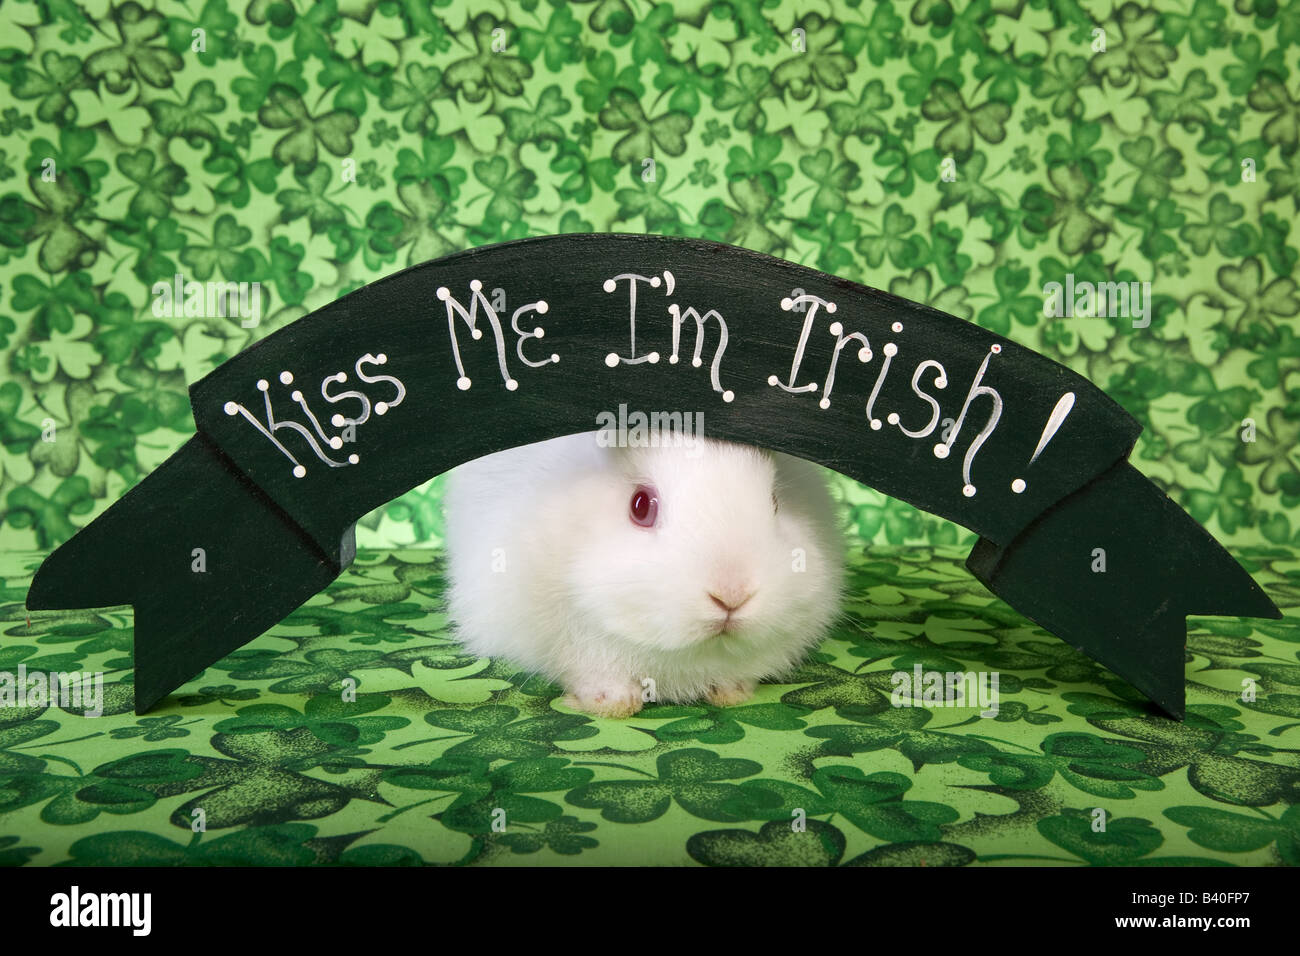 St Patricks Day white Netherland Dwarf Bunny Rabbit on green clover background with sign that say s Kiss me I m Irish Stock Photo